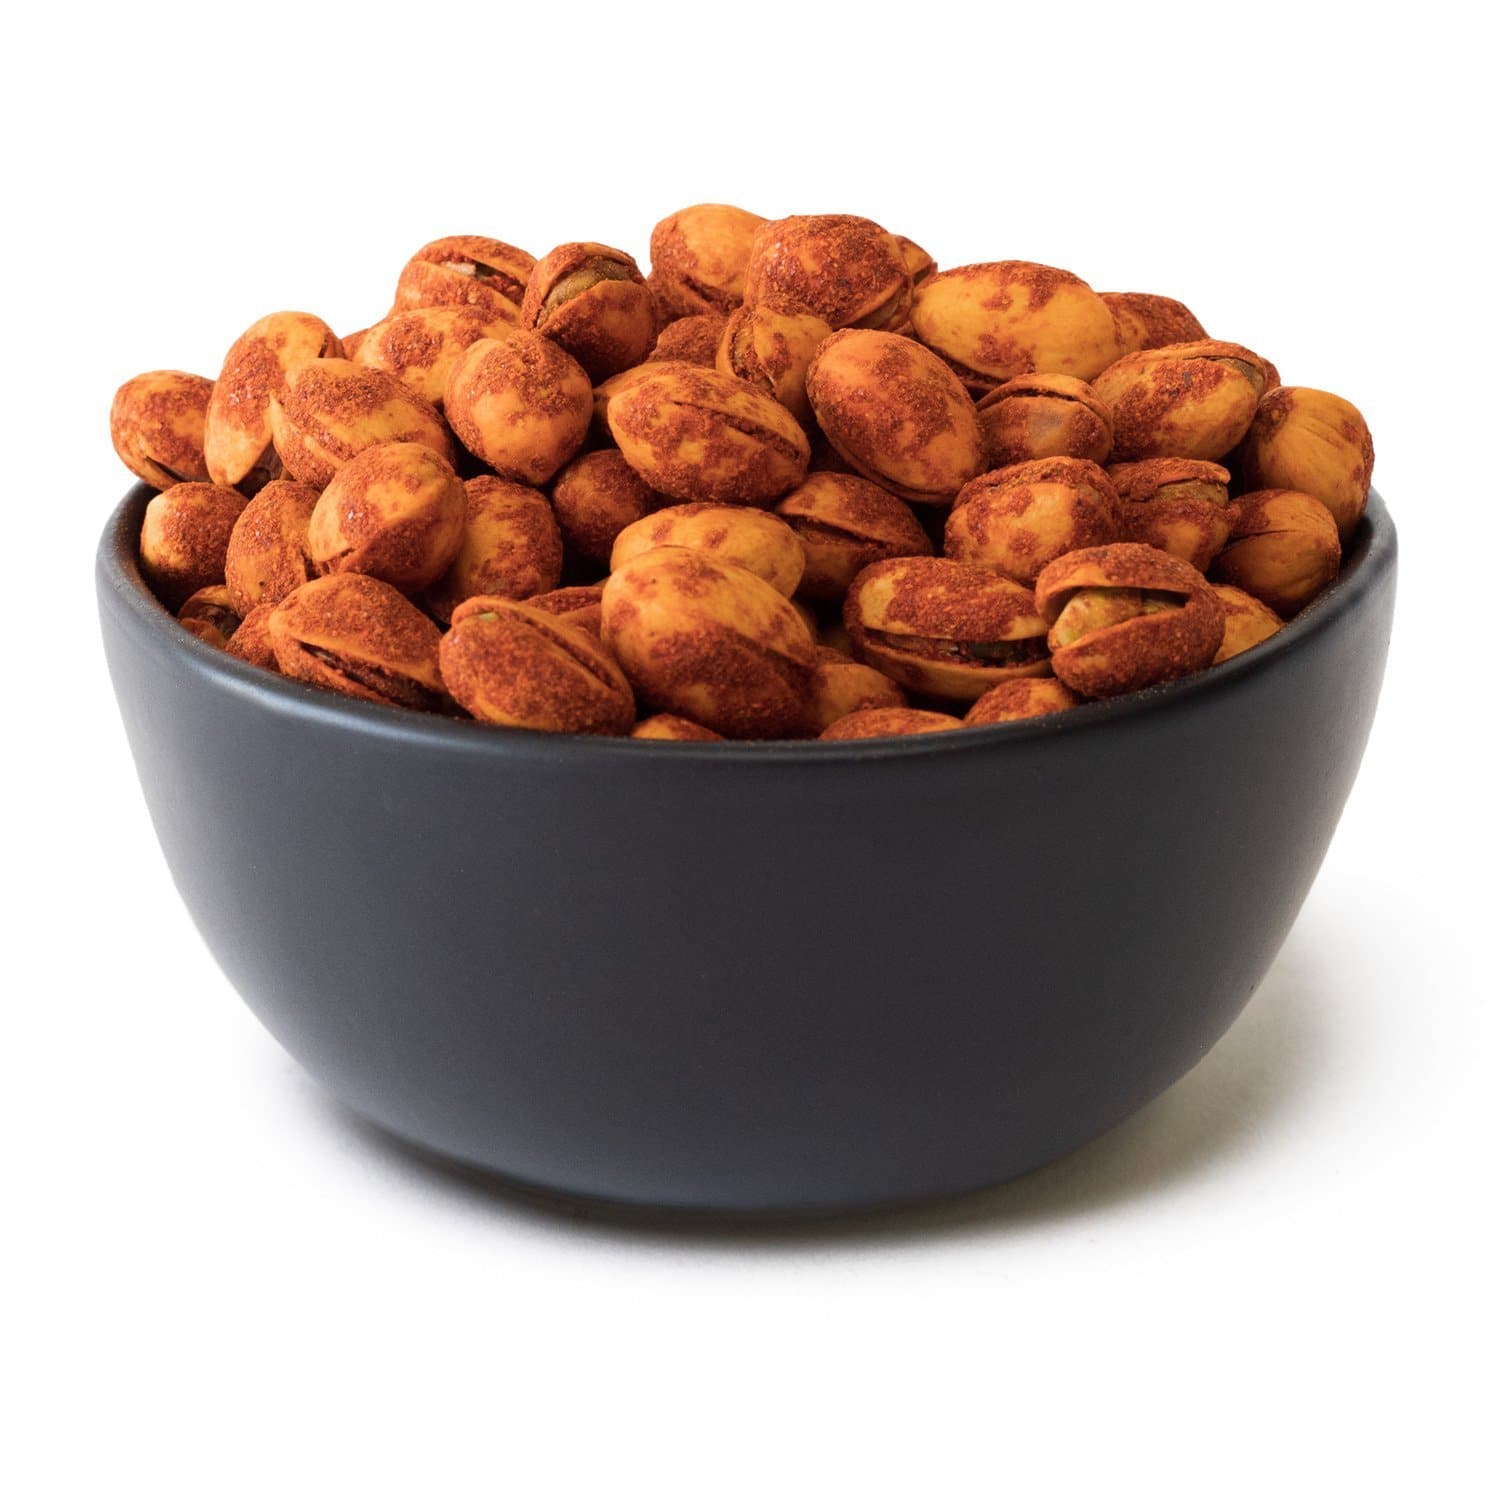 A bowl of Red Chile Pistachios coated with a spicy seasoning, isolated on a white background.